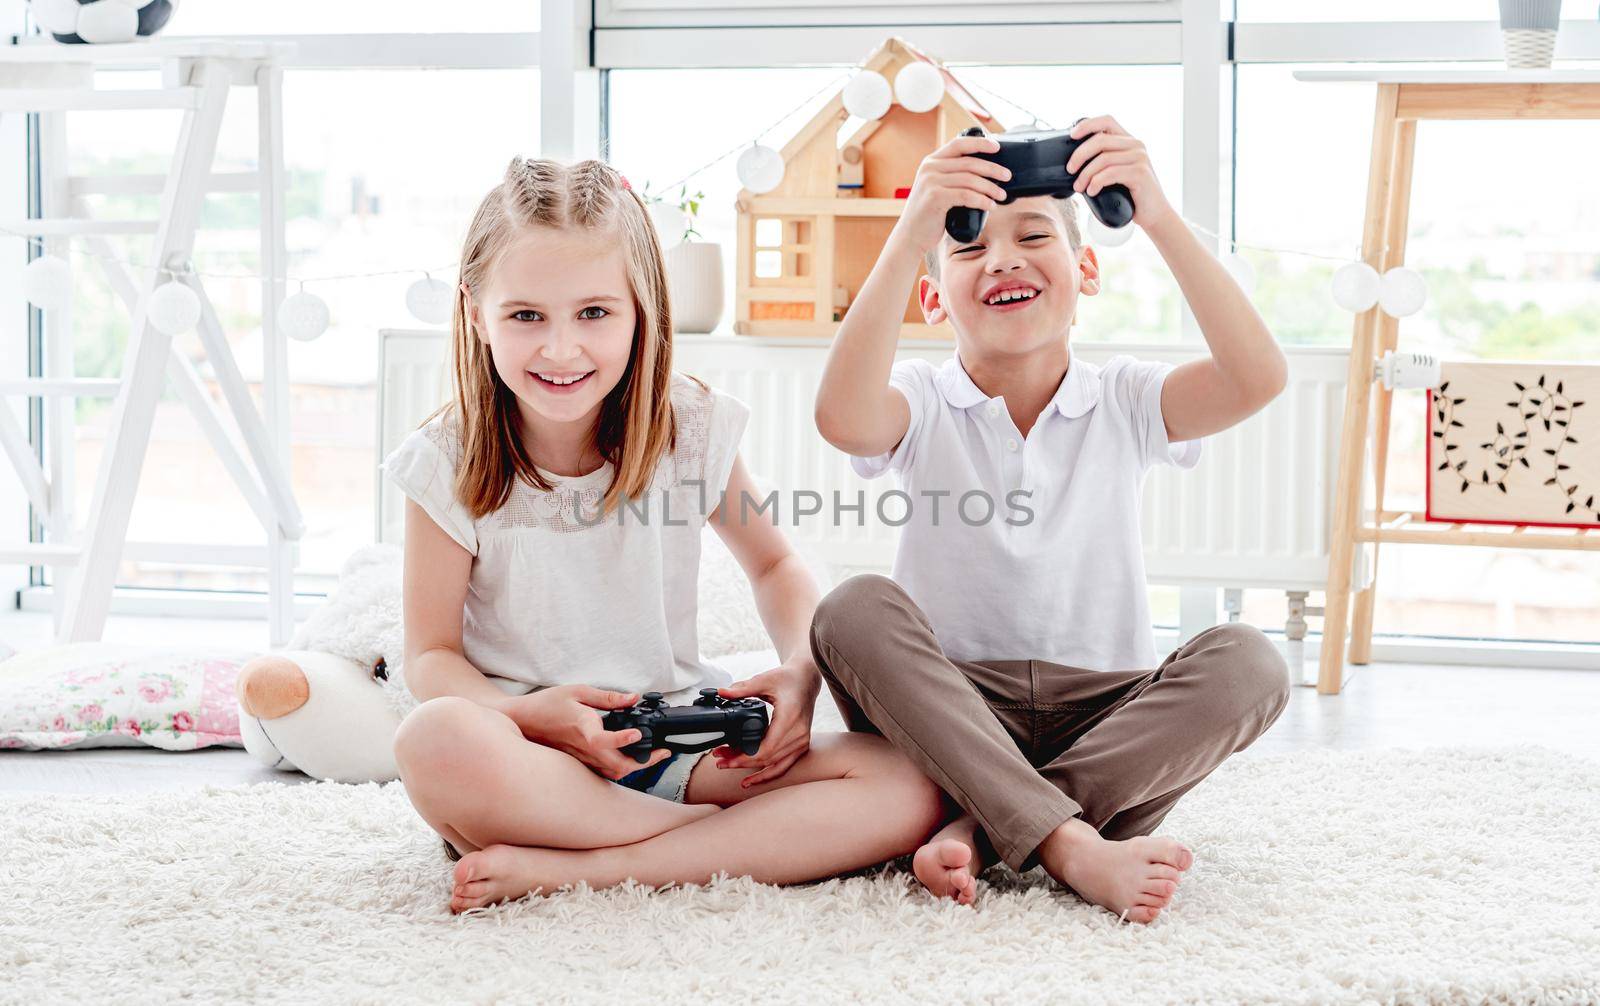 Playful kids with joysticks for gaming by tan4ikk1